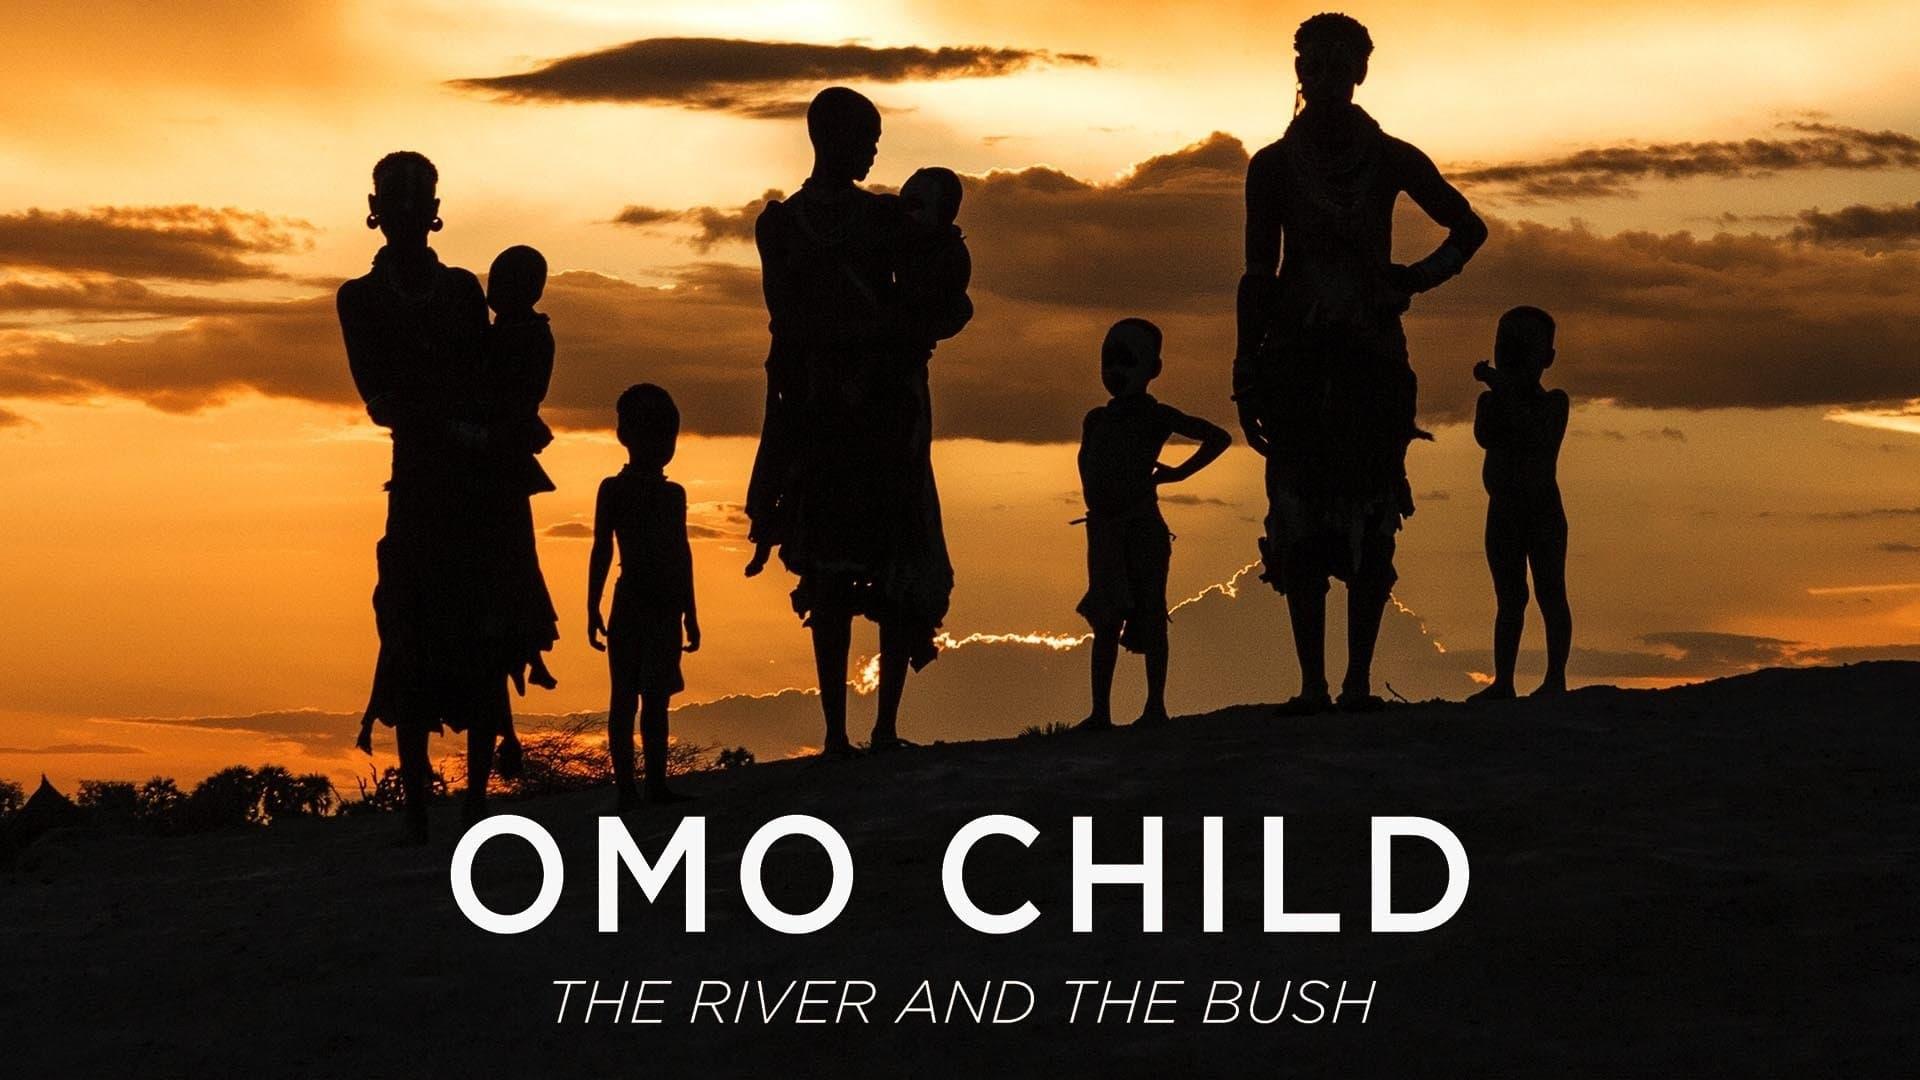 Omo Child: The River and the Bush backdrop